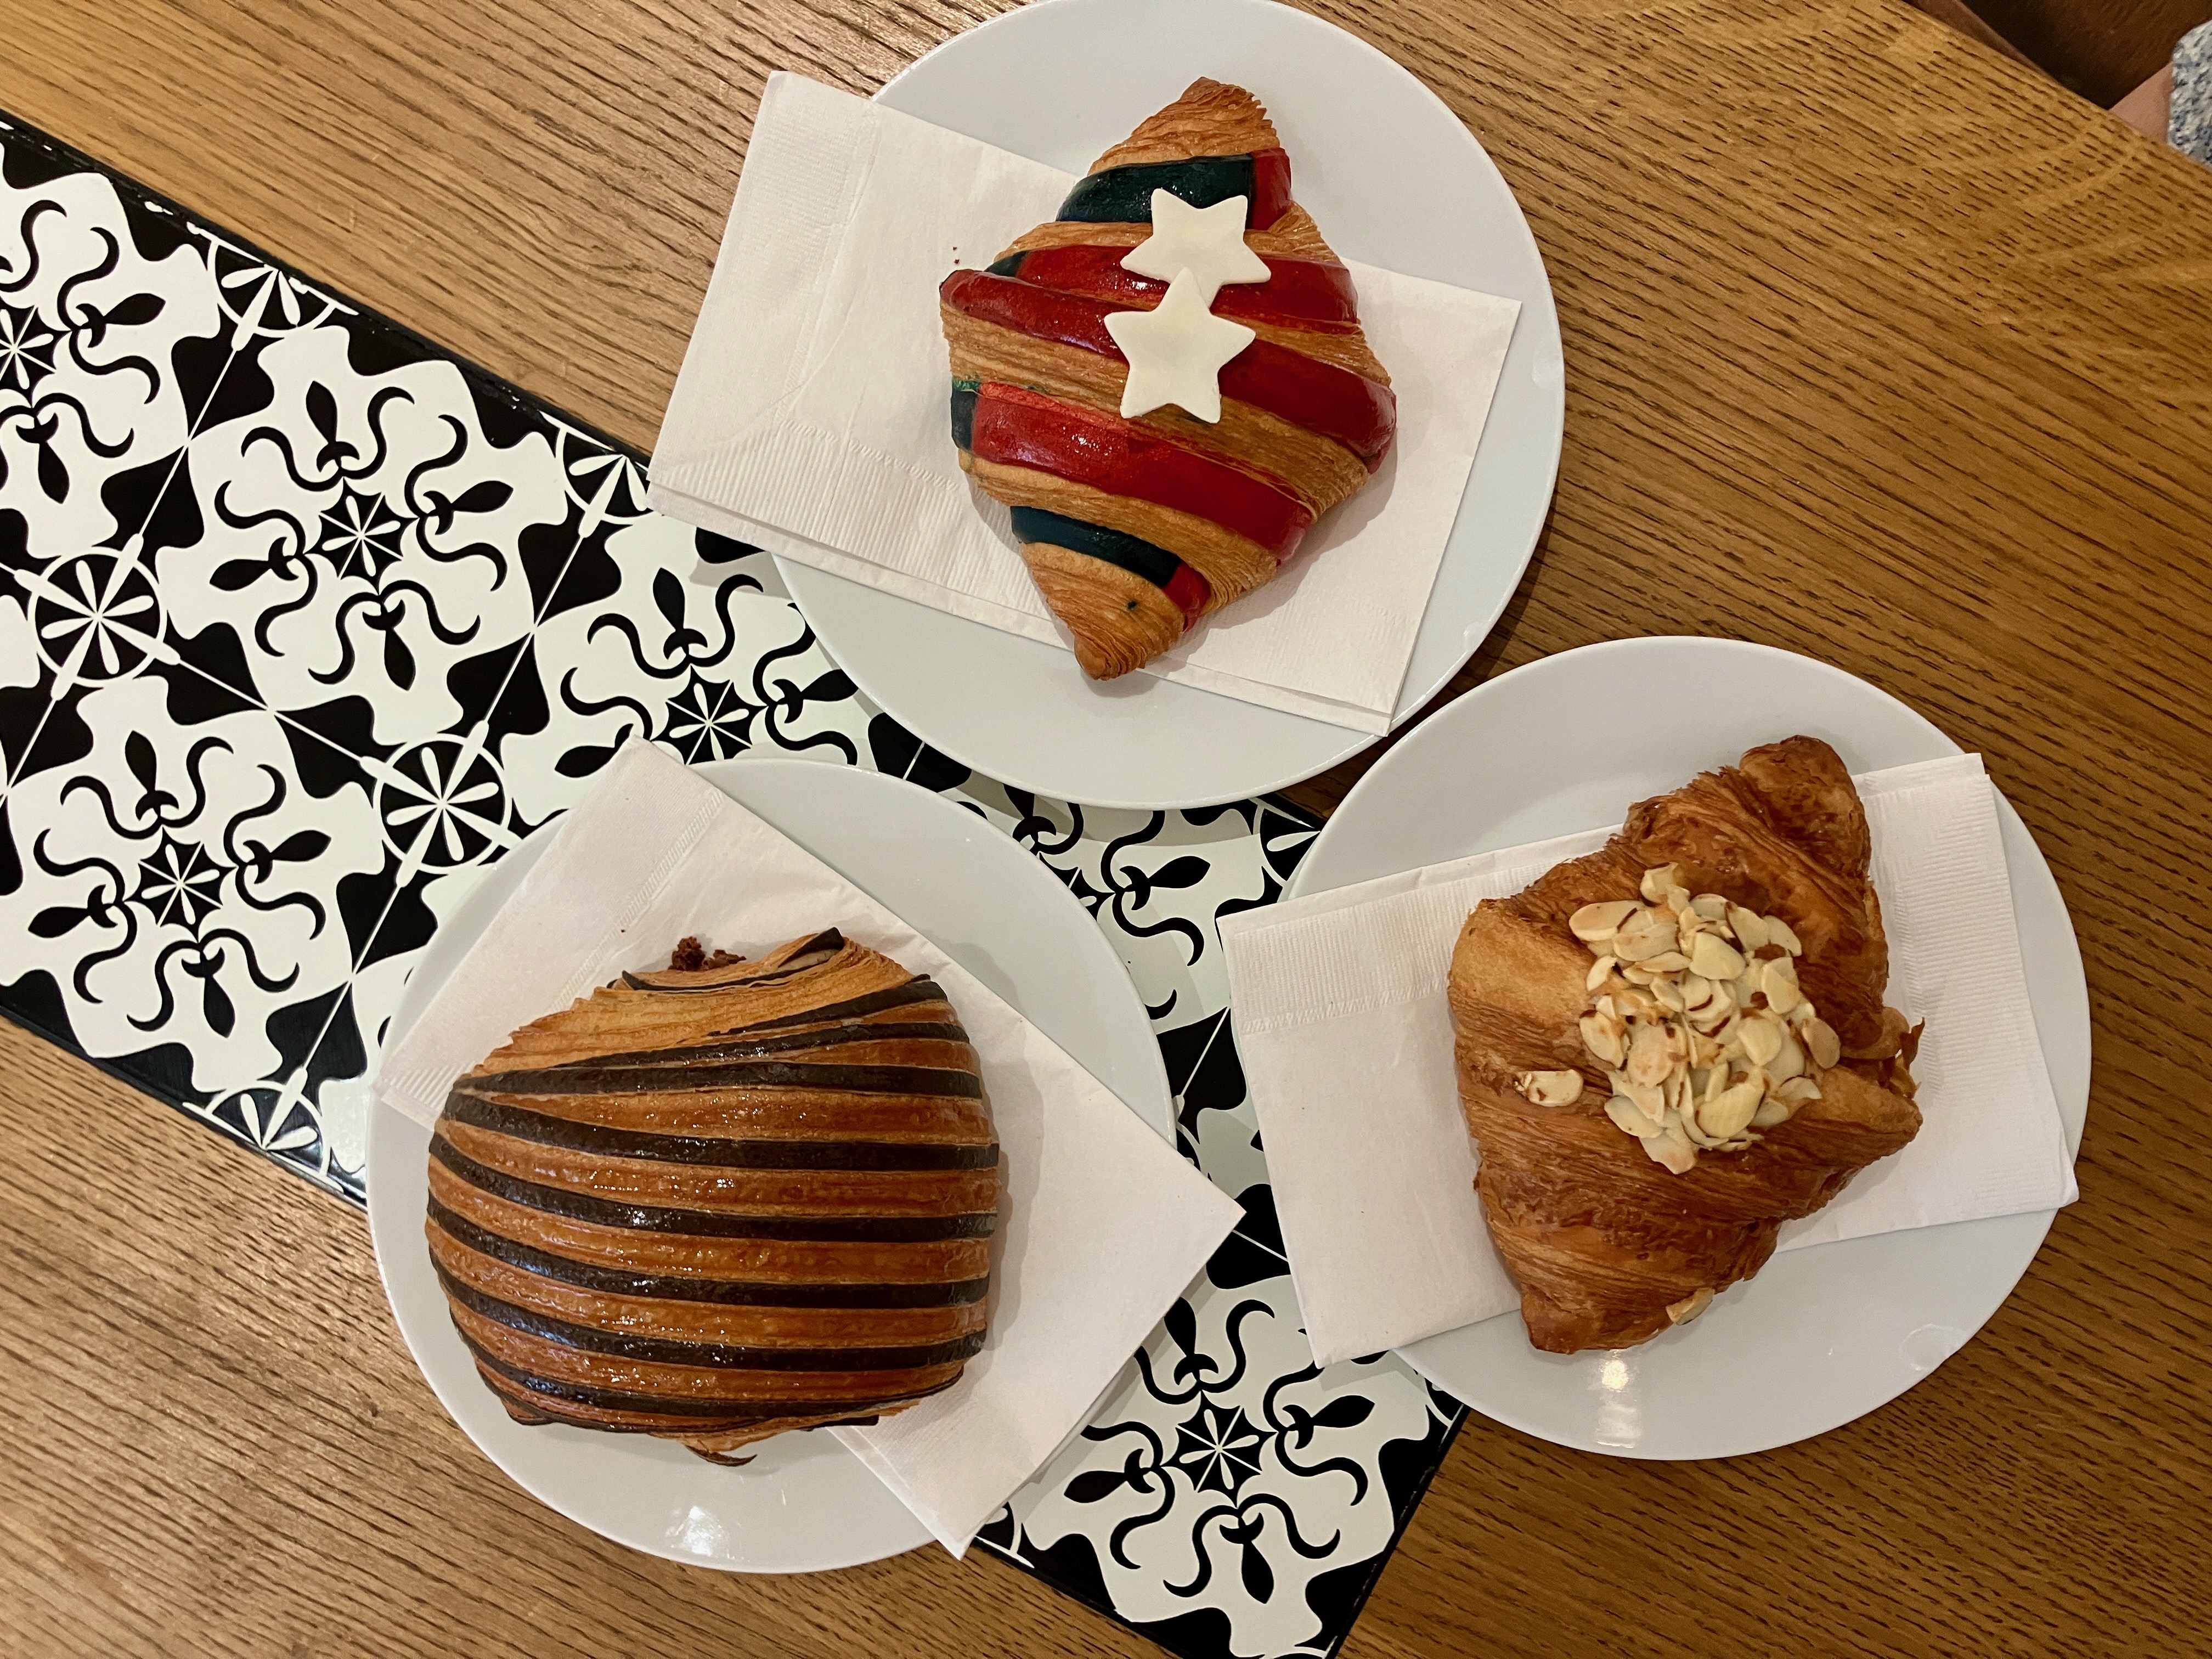 A hazelnut-chocolate croissant, Fourth of July-themed plain croissant and almond croissant are served at Maison Alyzée in Burlingame. (Kate Bradshaw/Bay Area News Group)